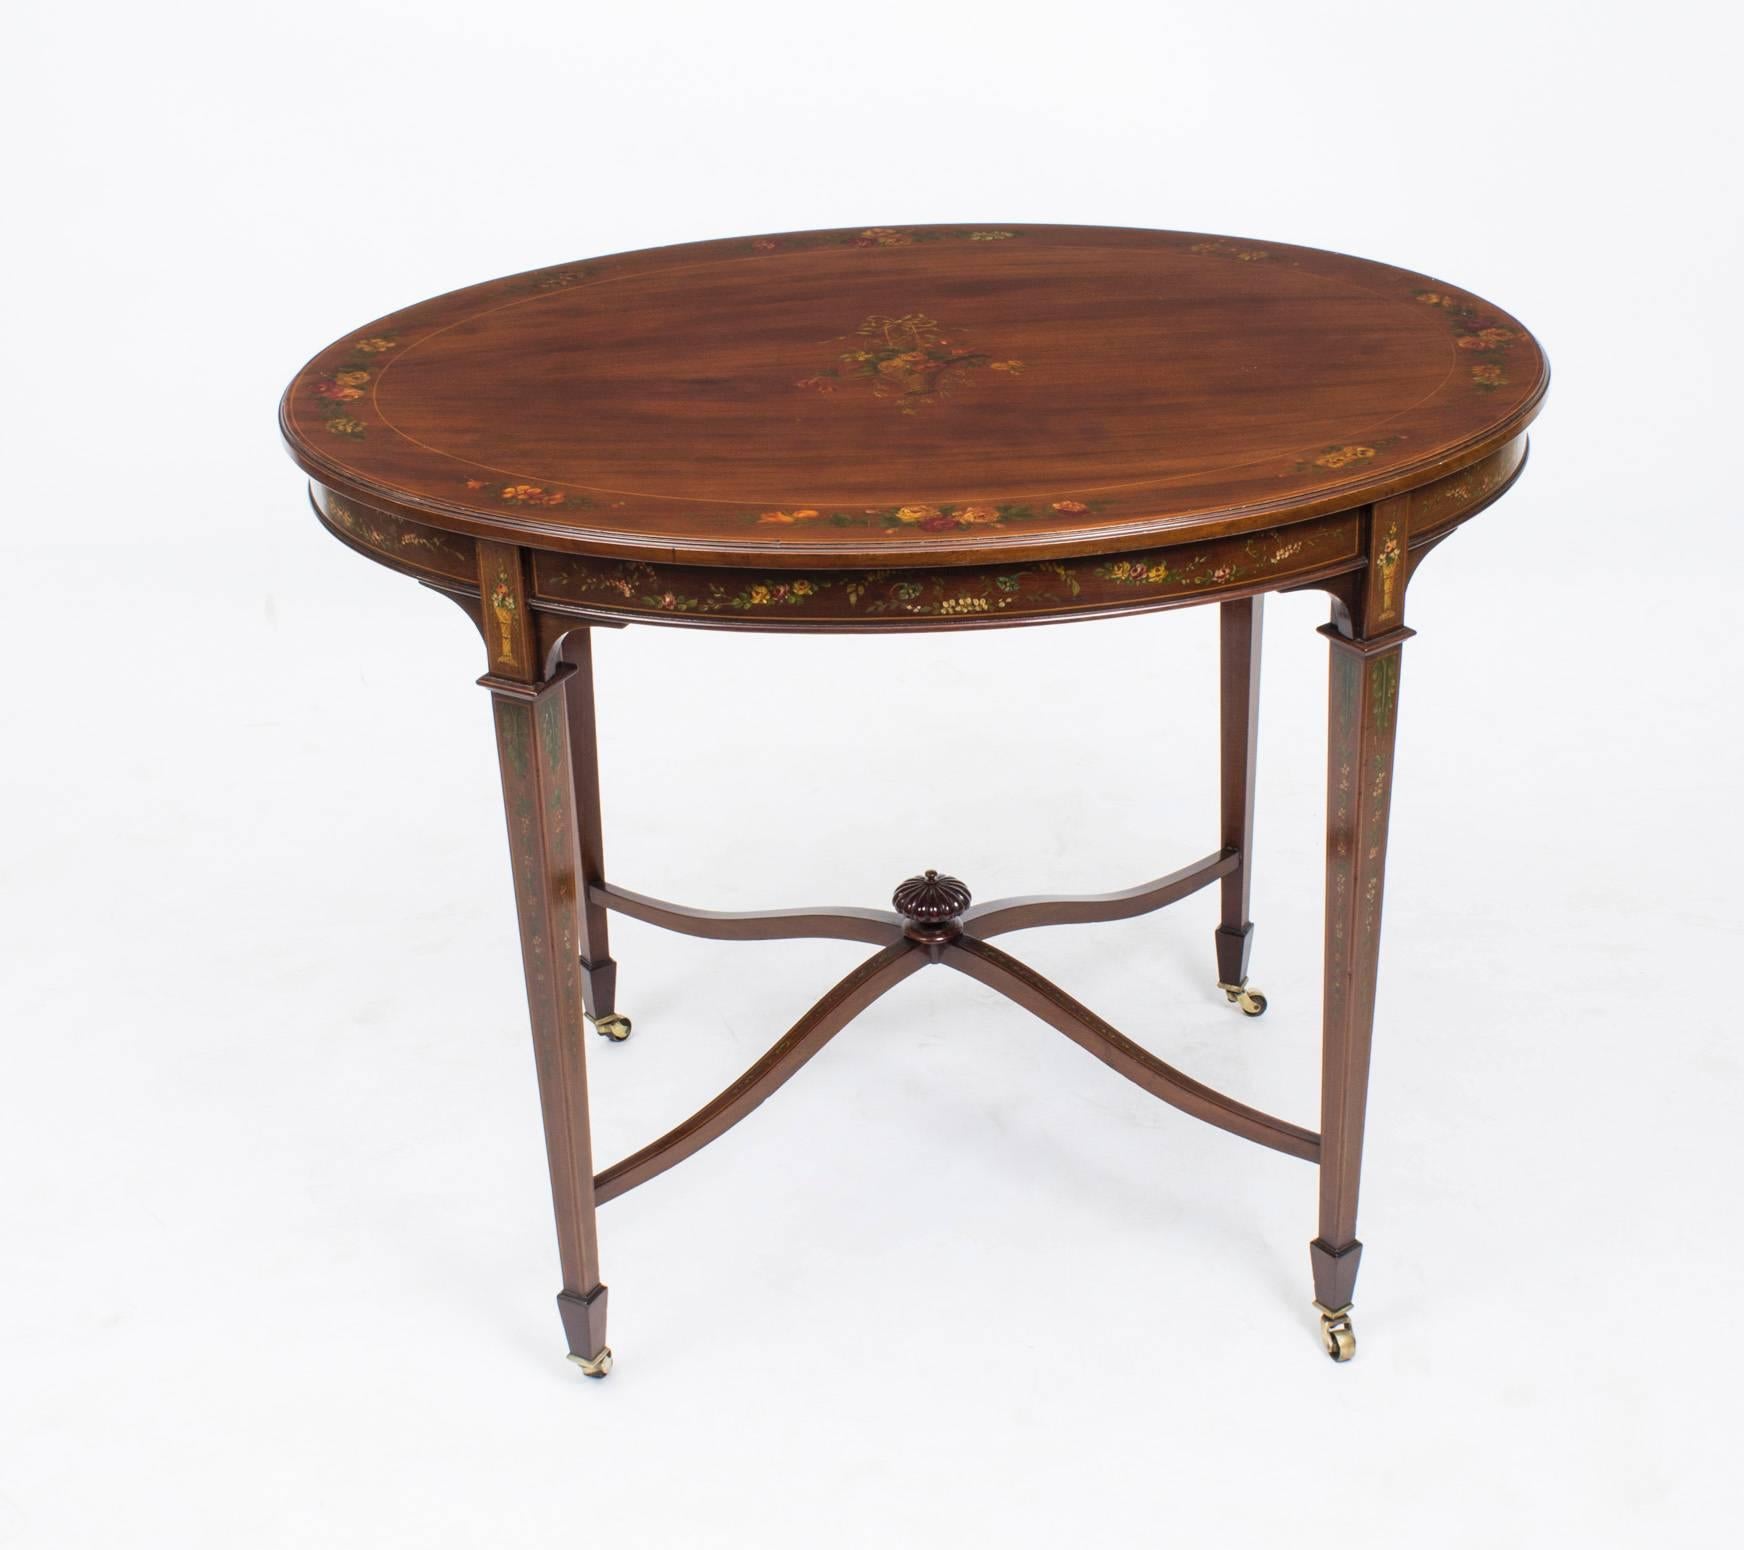 A truly exceptional Antique English Edwardian oval mahogany occasional table circa 1890 in date.

Crafted from flame mahogany note the wonderful grain to the wood, and beautifully hand-painted,with floral sprays, garlands with string inlaid